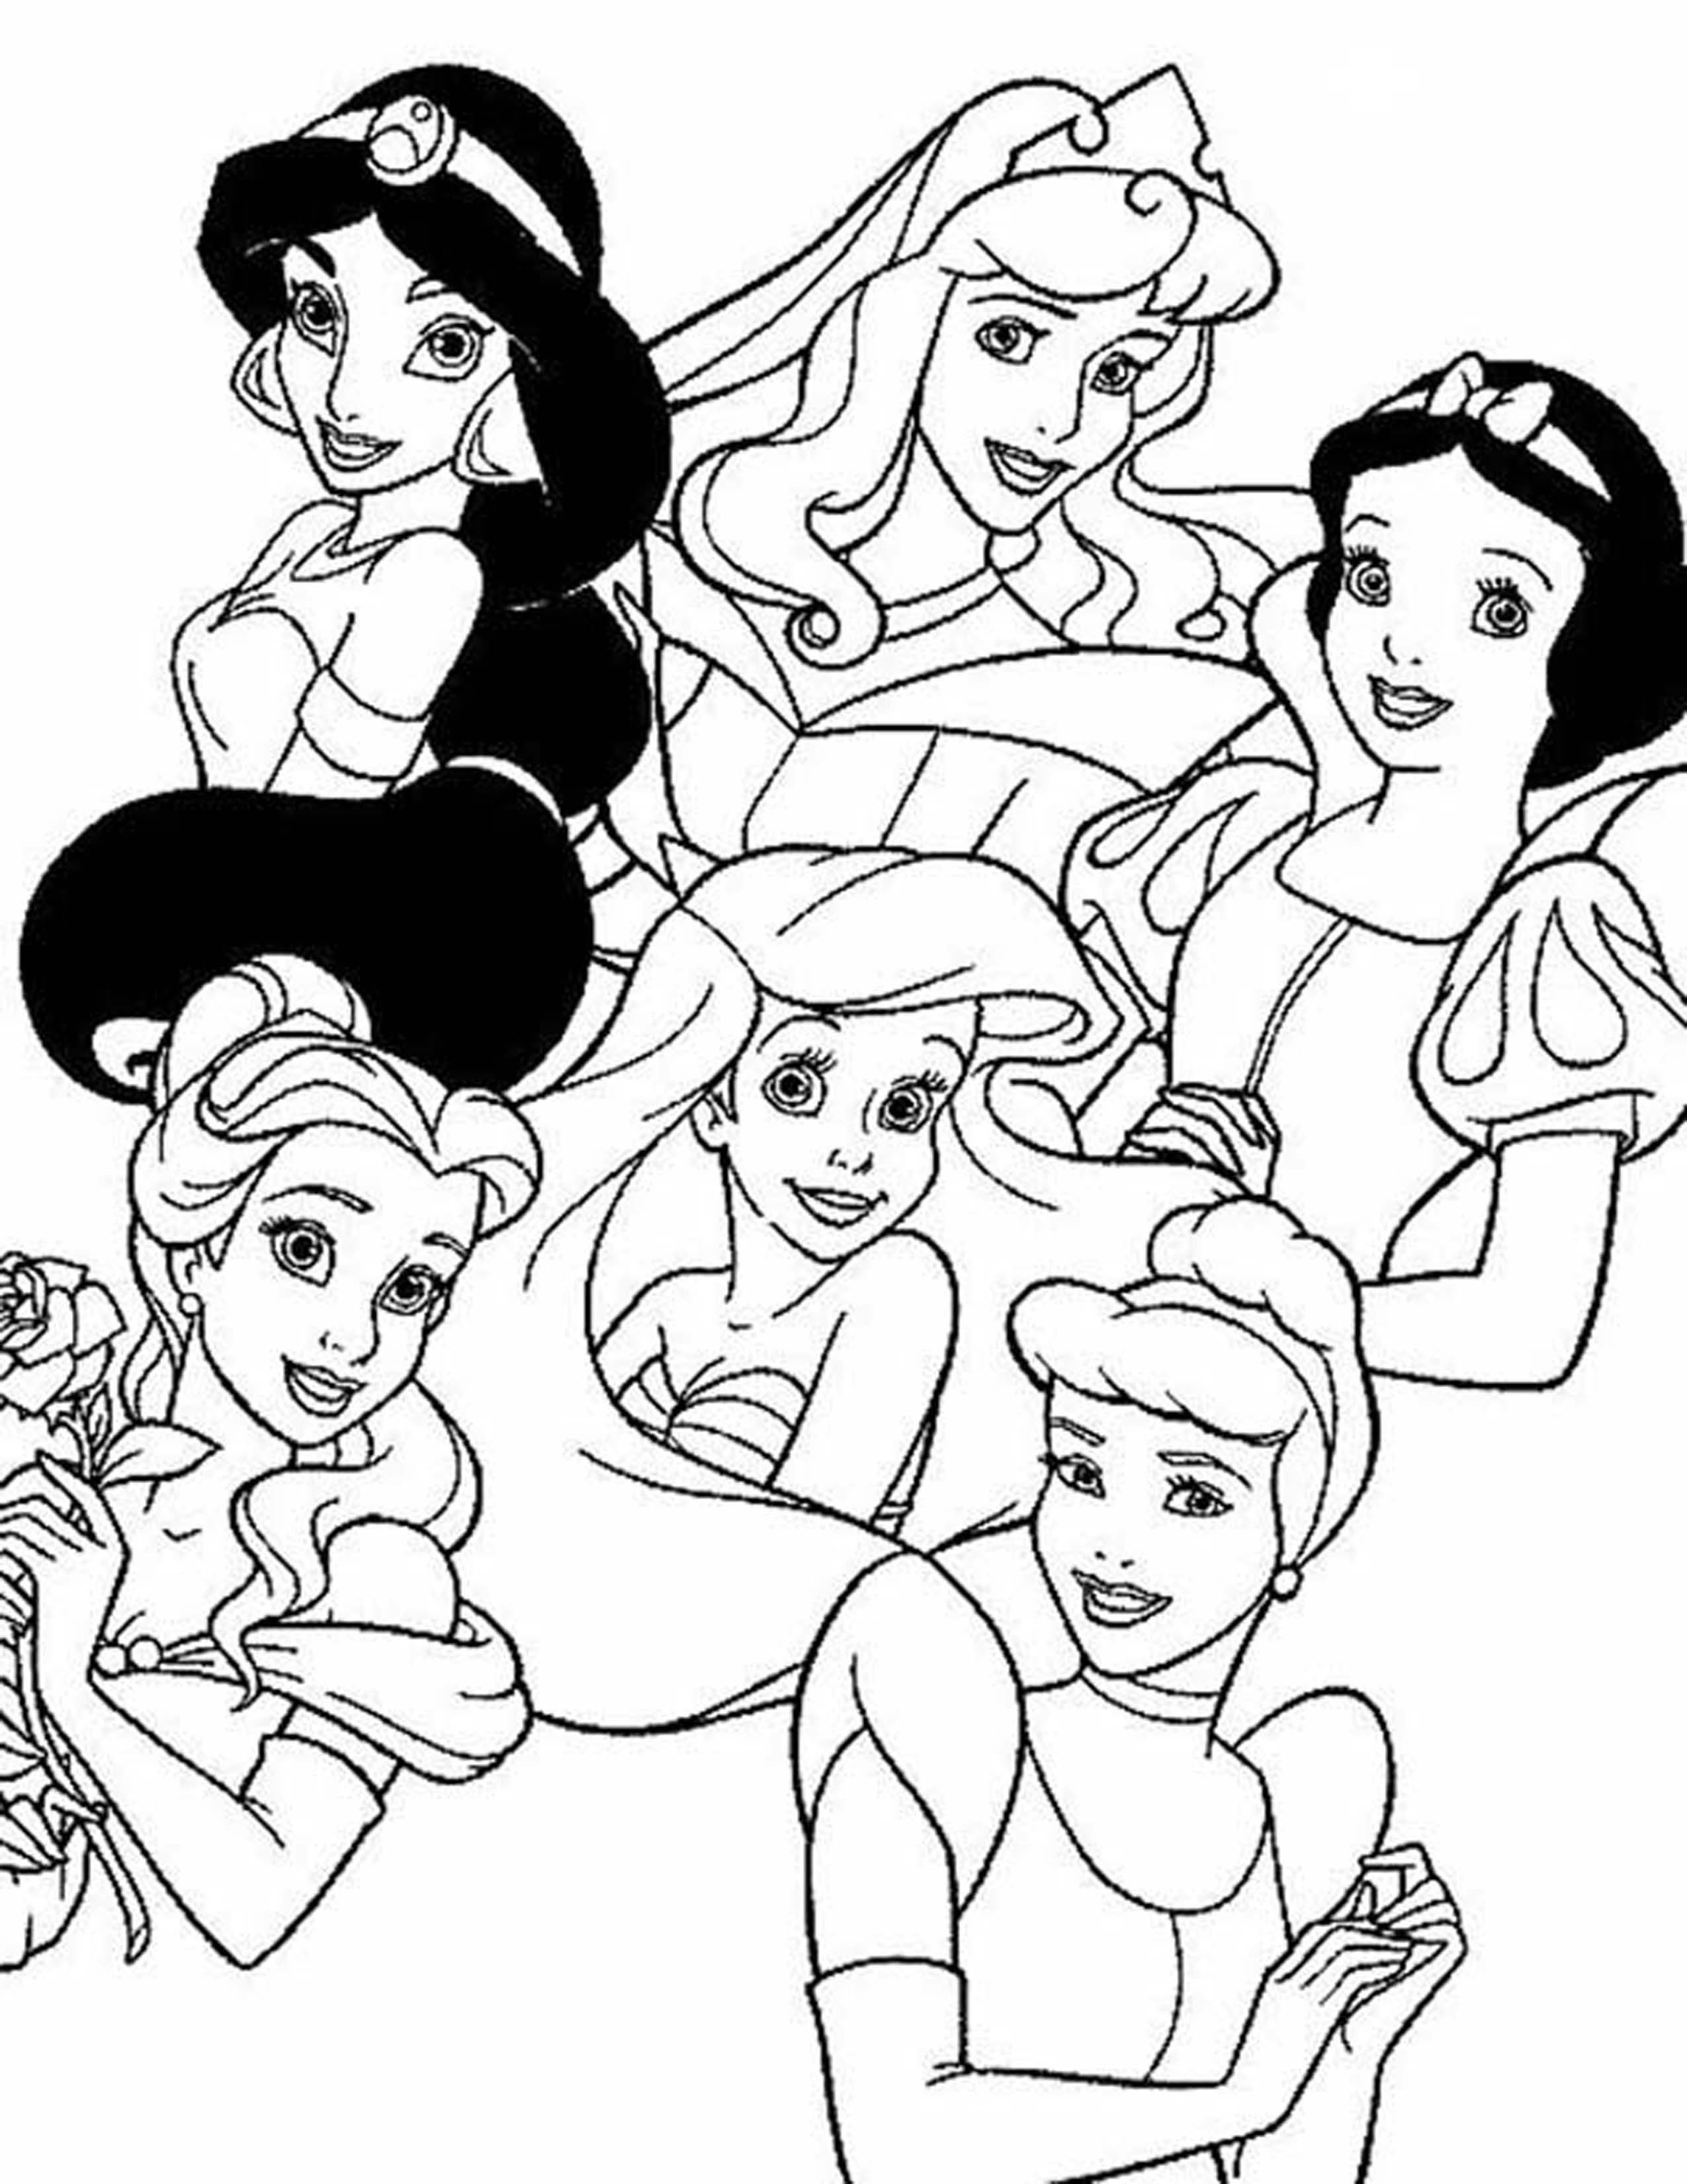 Papers Princess Coloring Pages Resume Format Download Pdf - Widetheme